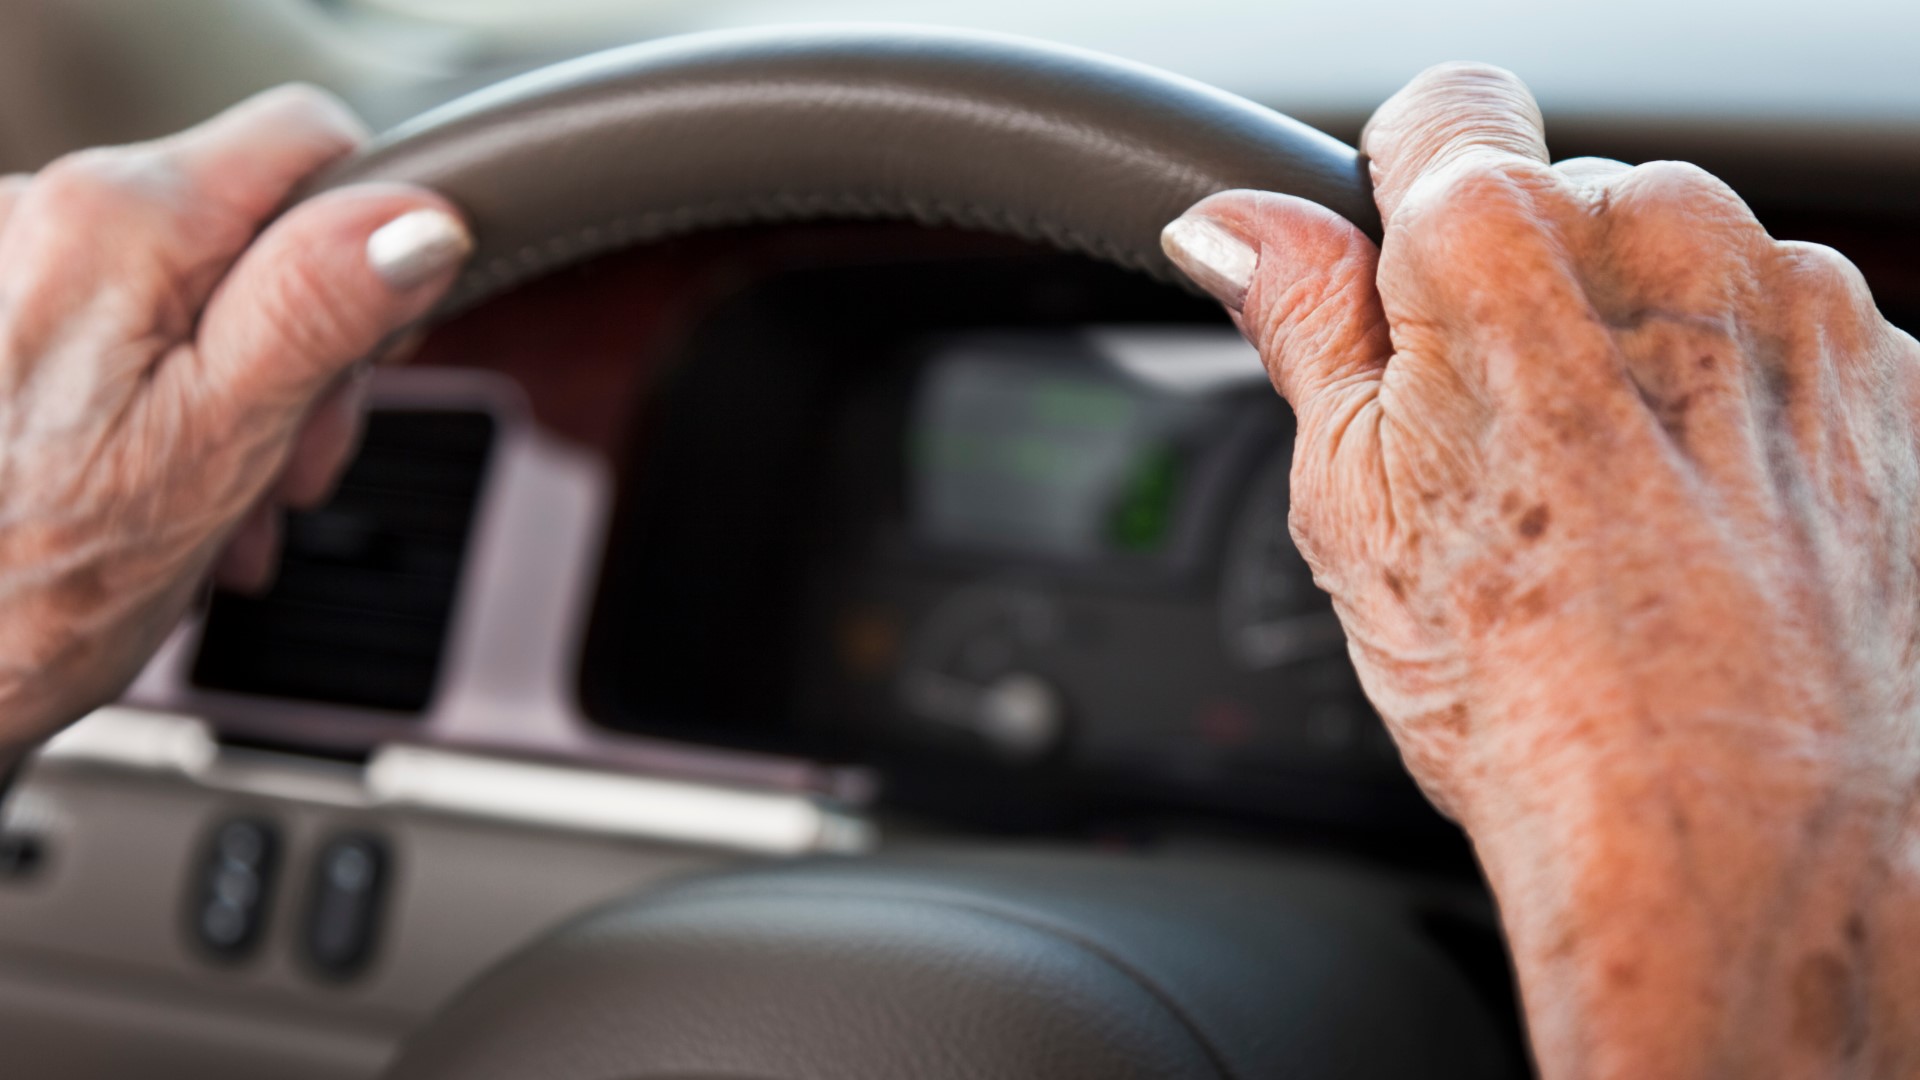 The event aimed to share information to help seniors extend their years on the road, while also reminding them of other available transportation options.